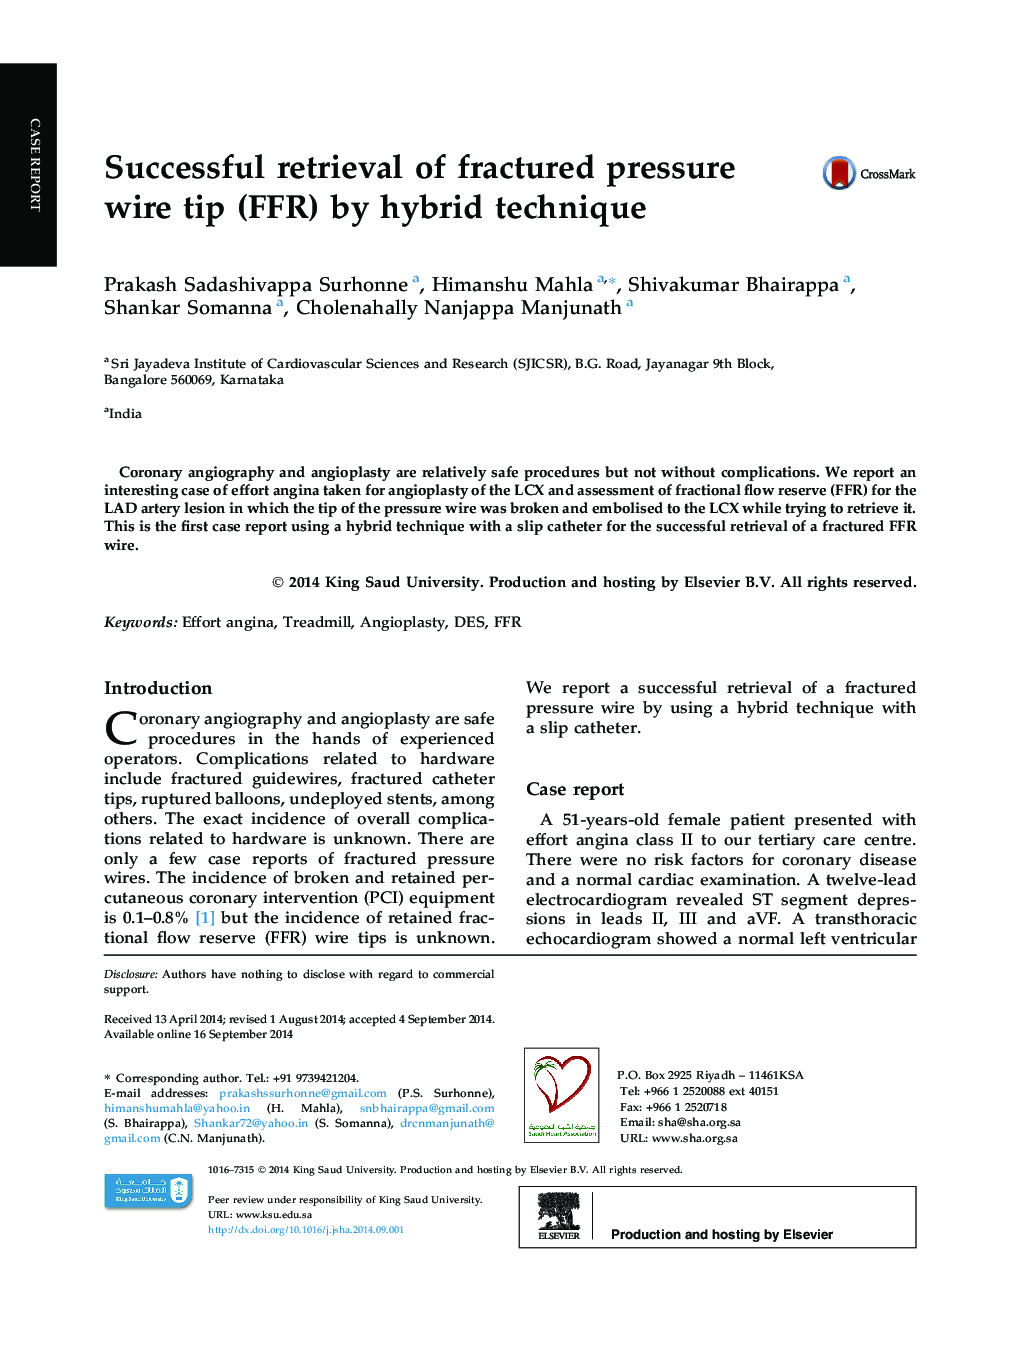 Successful retrieval of fractured pressure wire tip (FFR) by hybrid technique 